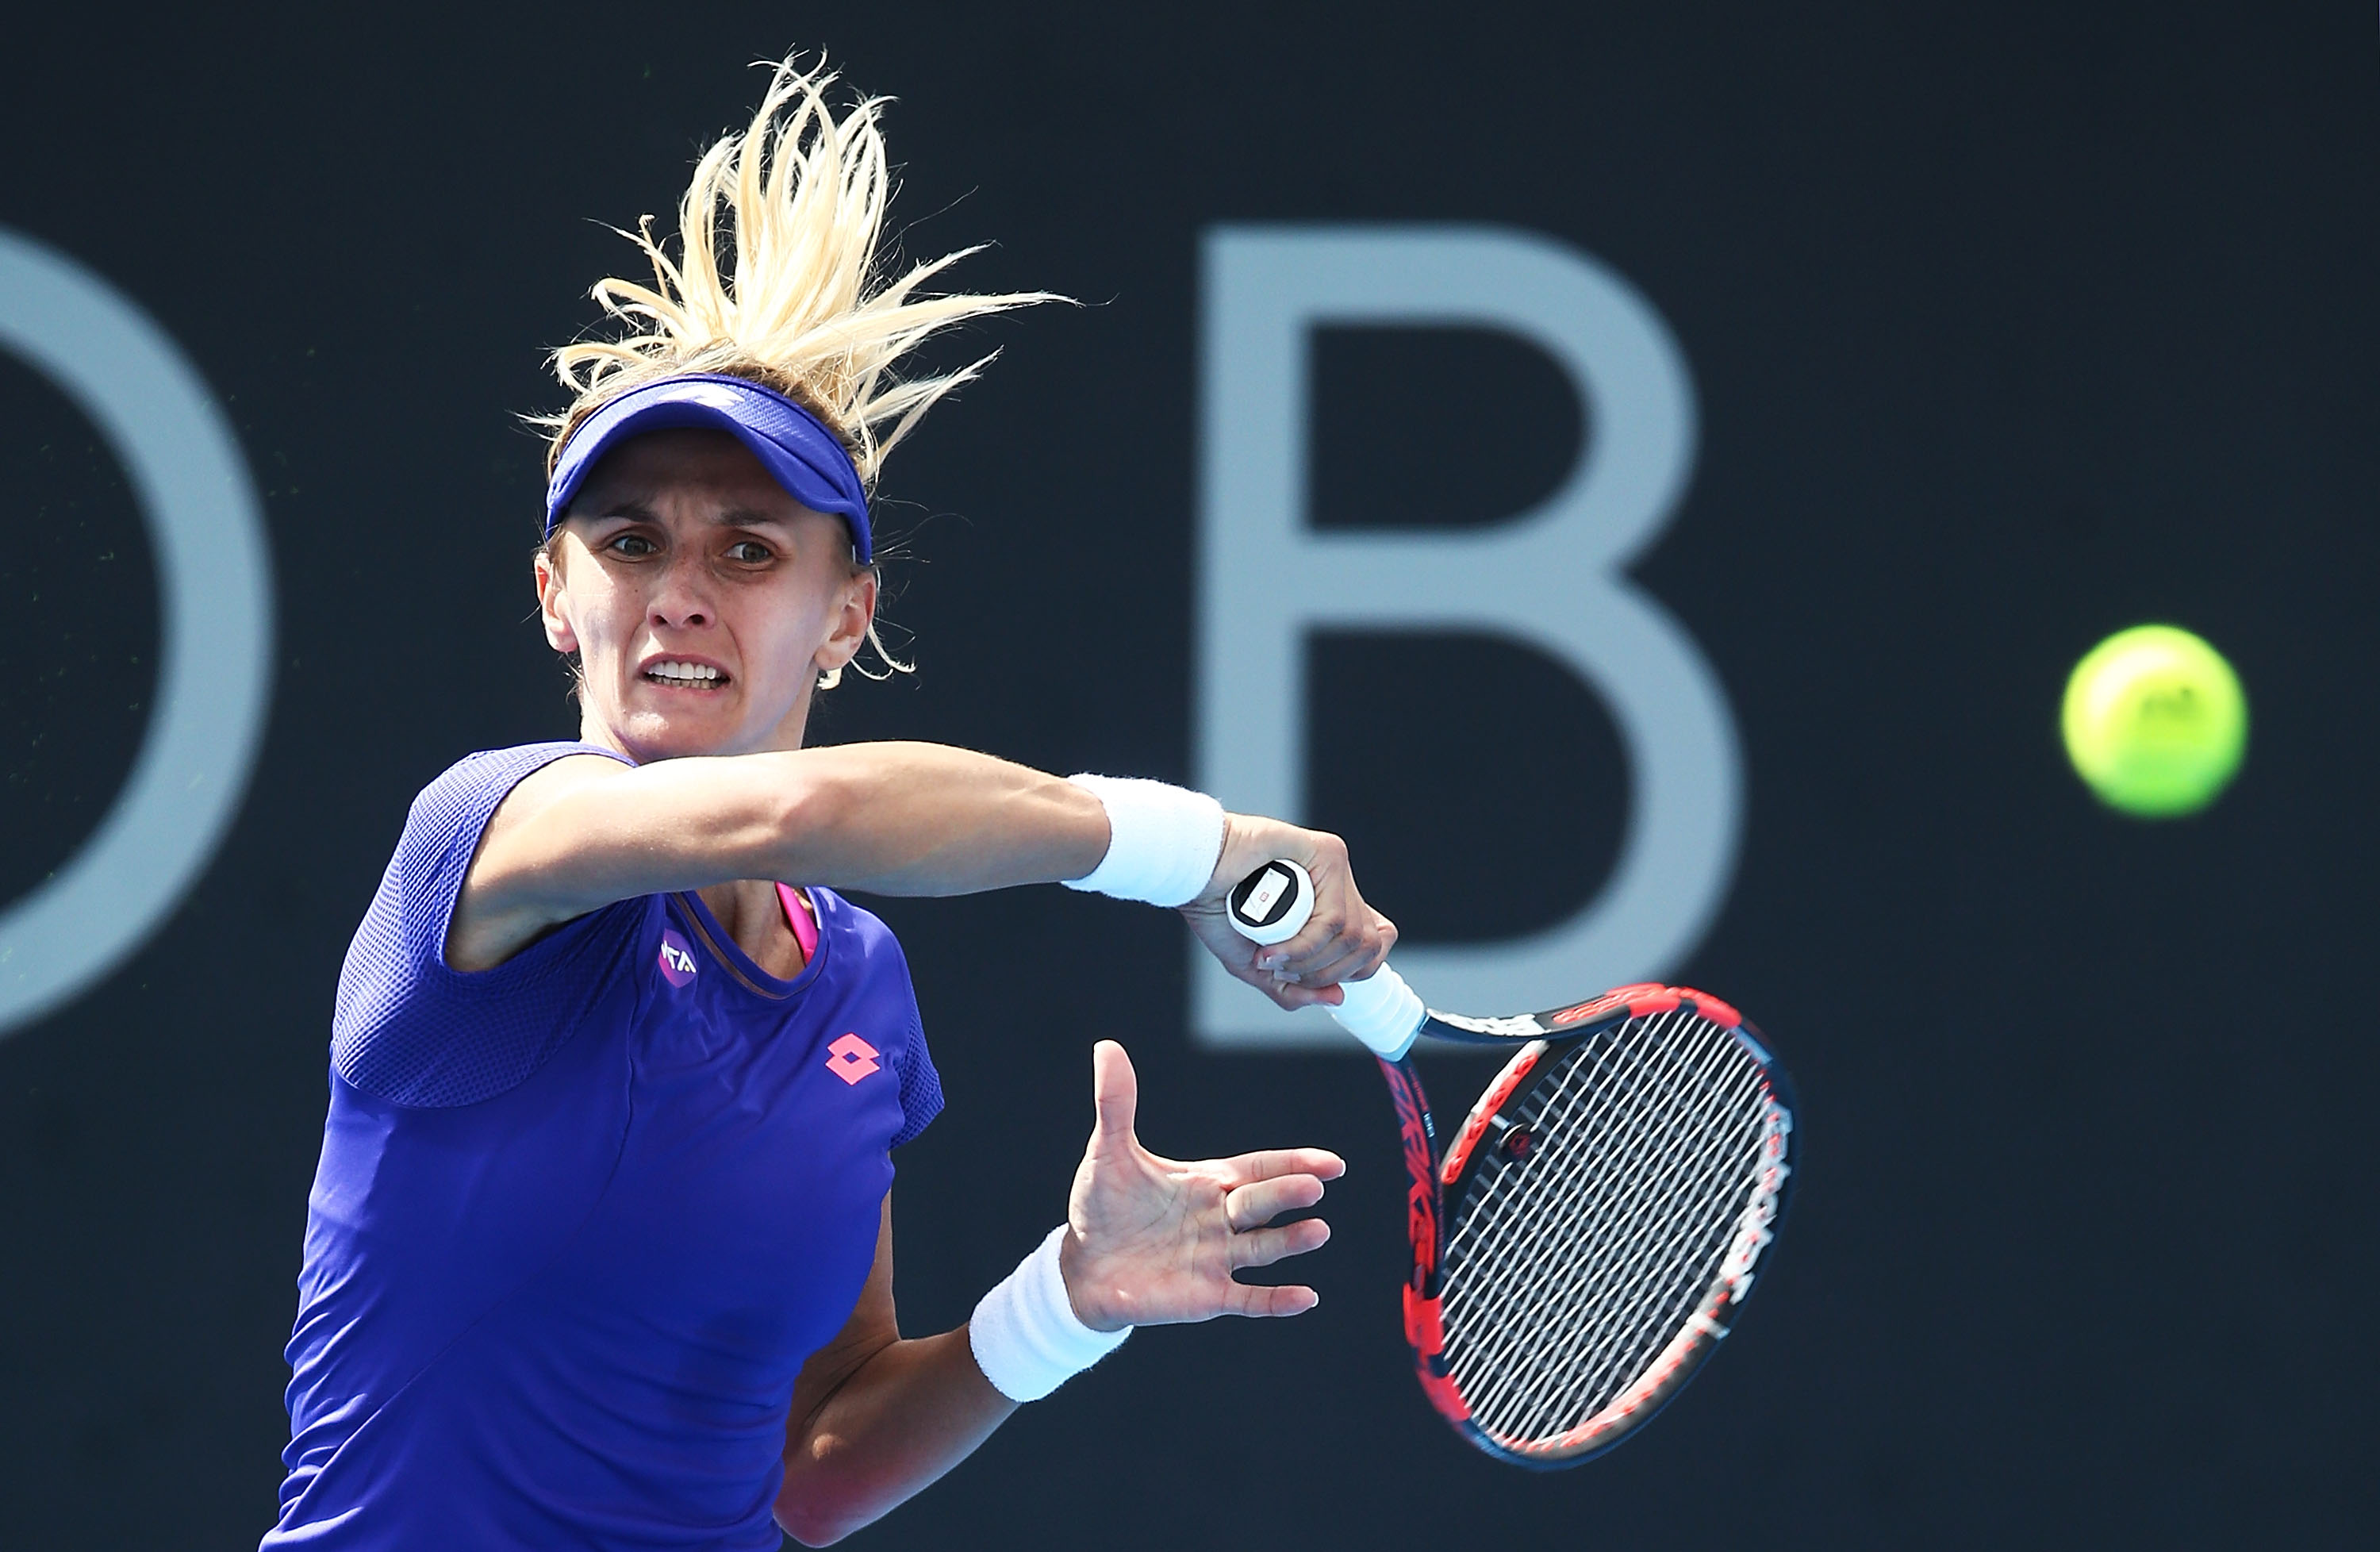 MOVING ON: Ukrainian Lesia Tsurenko fires a forehand during her second round win over 11th seed Johanna Larsson; Getty Images